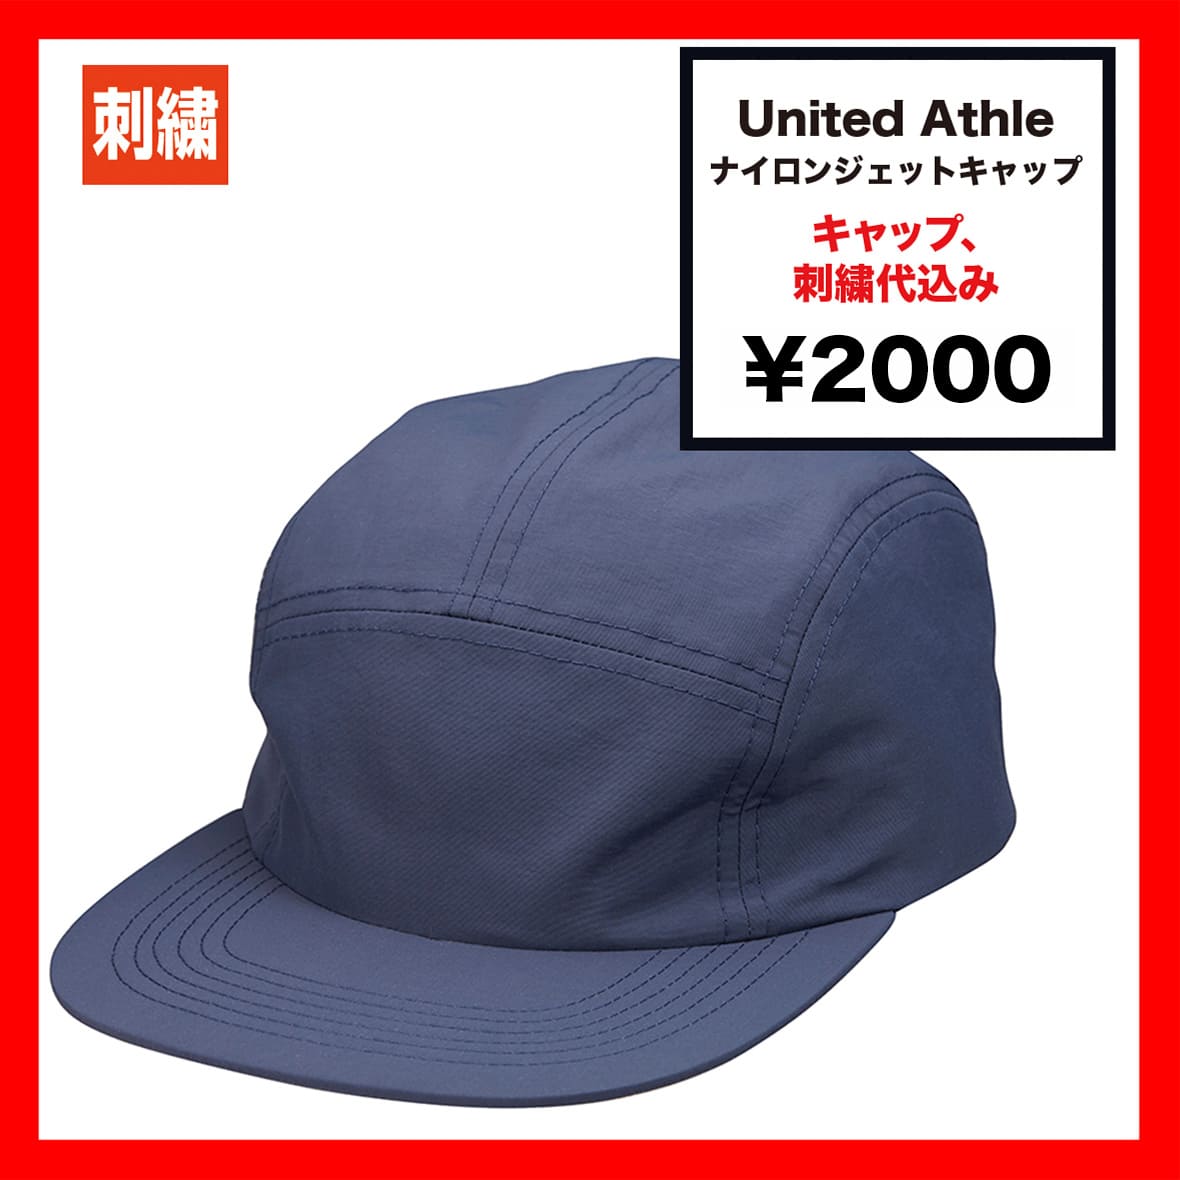 United Athle ユナイテッドアスレ ナイロン ジェット キャップ (品番9672-01)